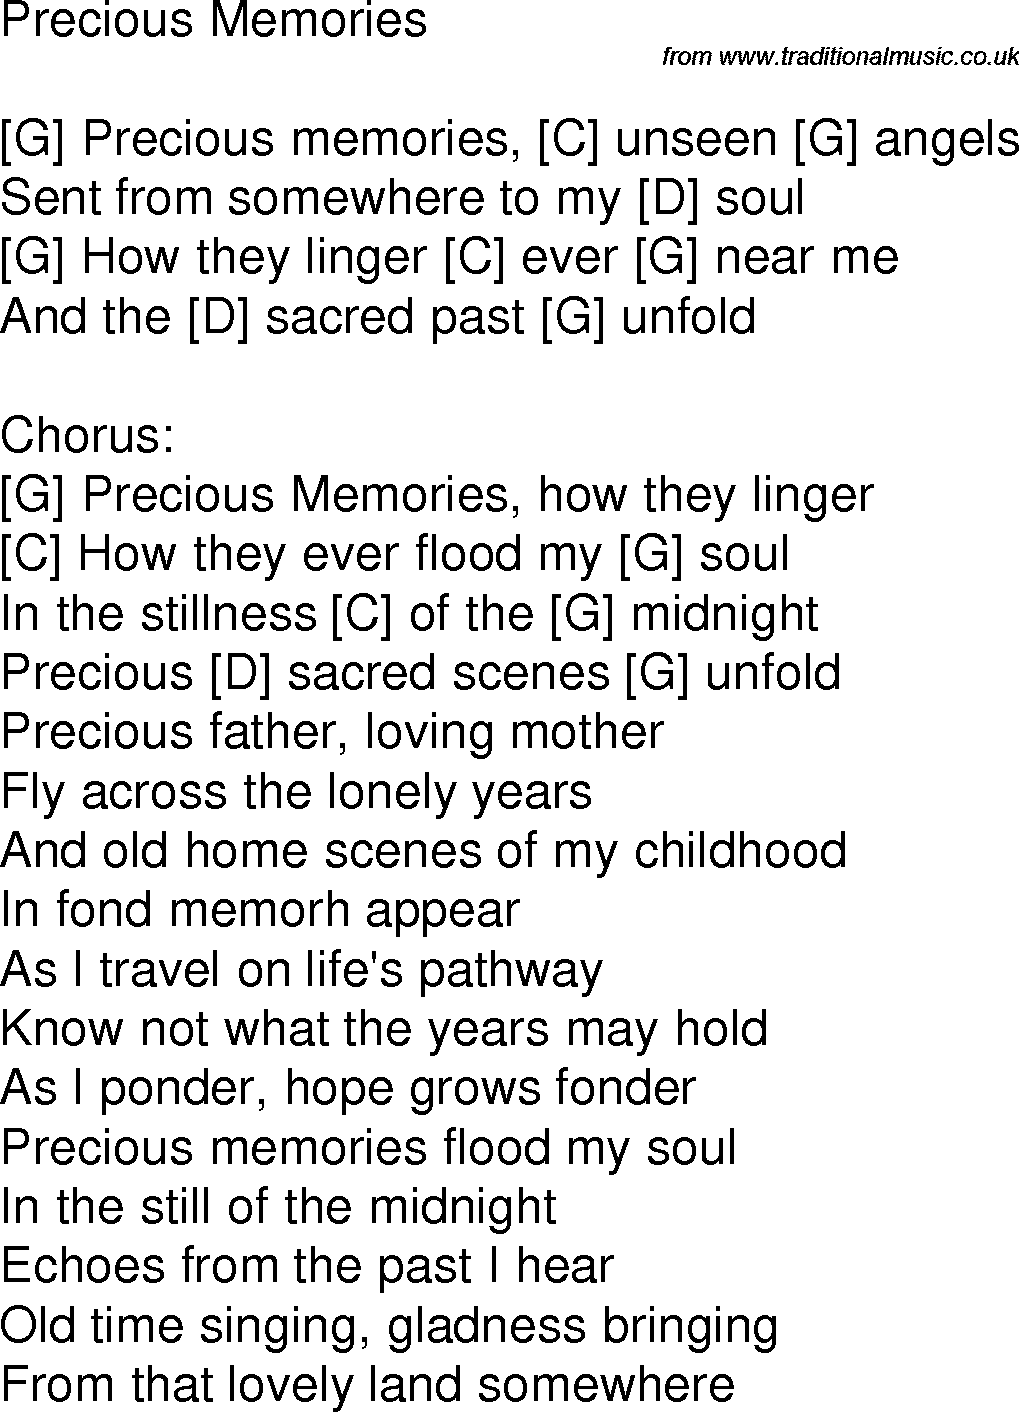 Old Time Song Lyrics With Guitar Chords For Precious Memories G